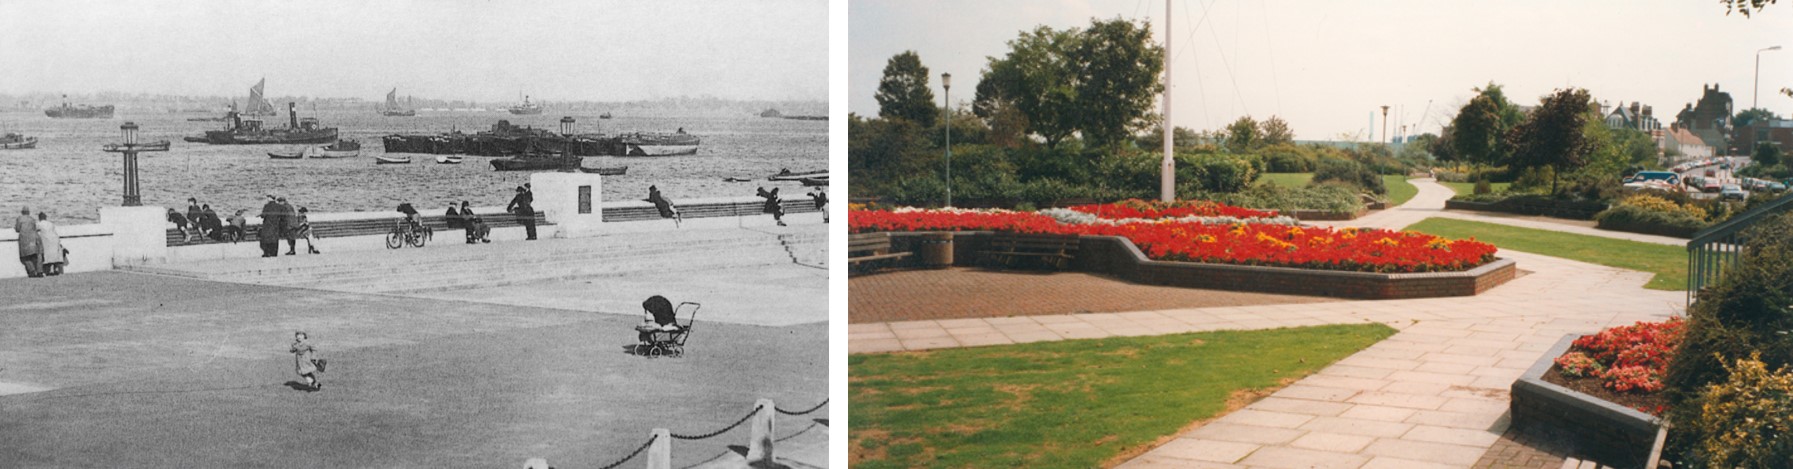 Photos of the Riverside Gardens in the 1940s and 1980s